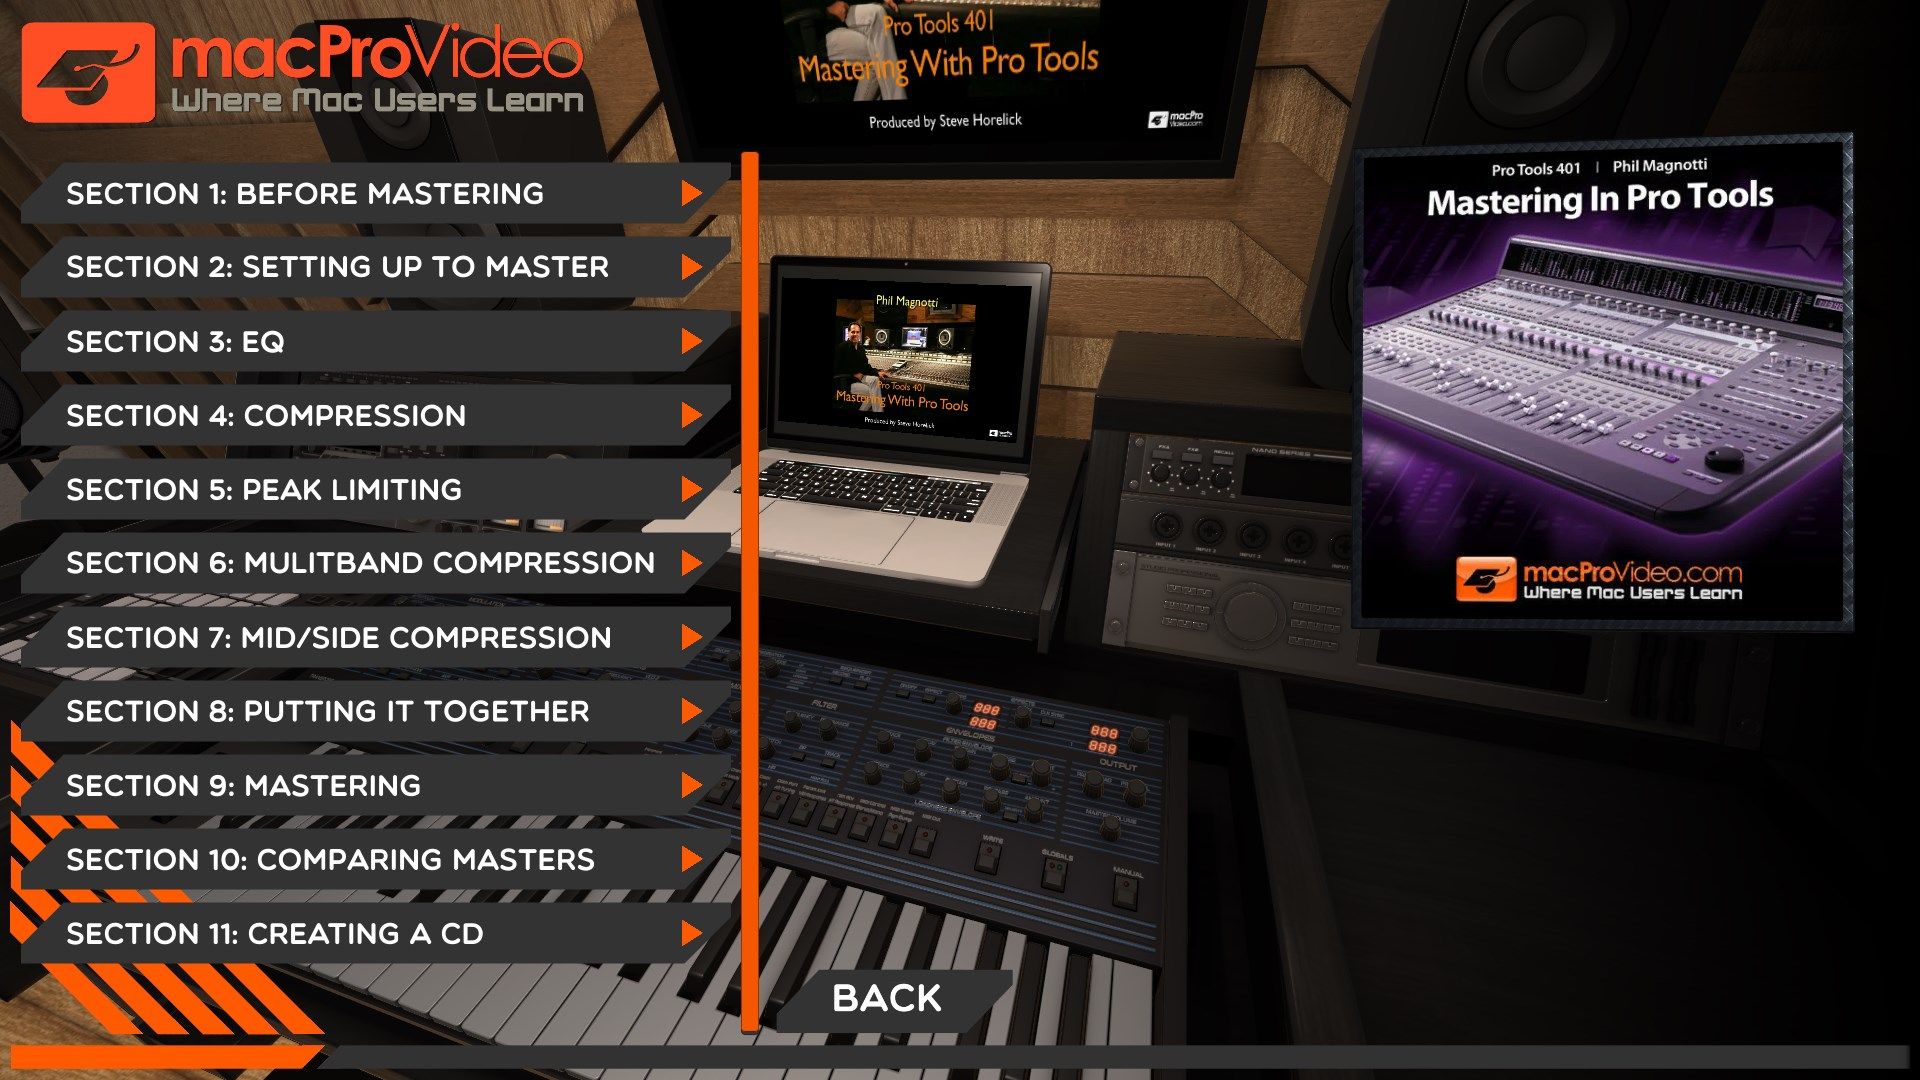 mPV Mastering Course For Pro Tools